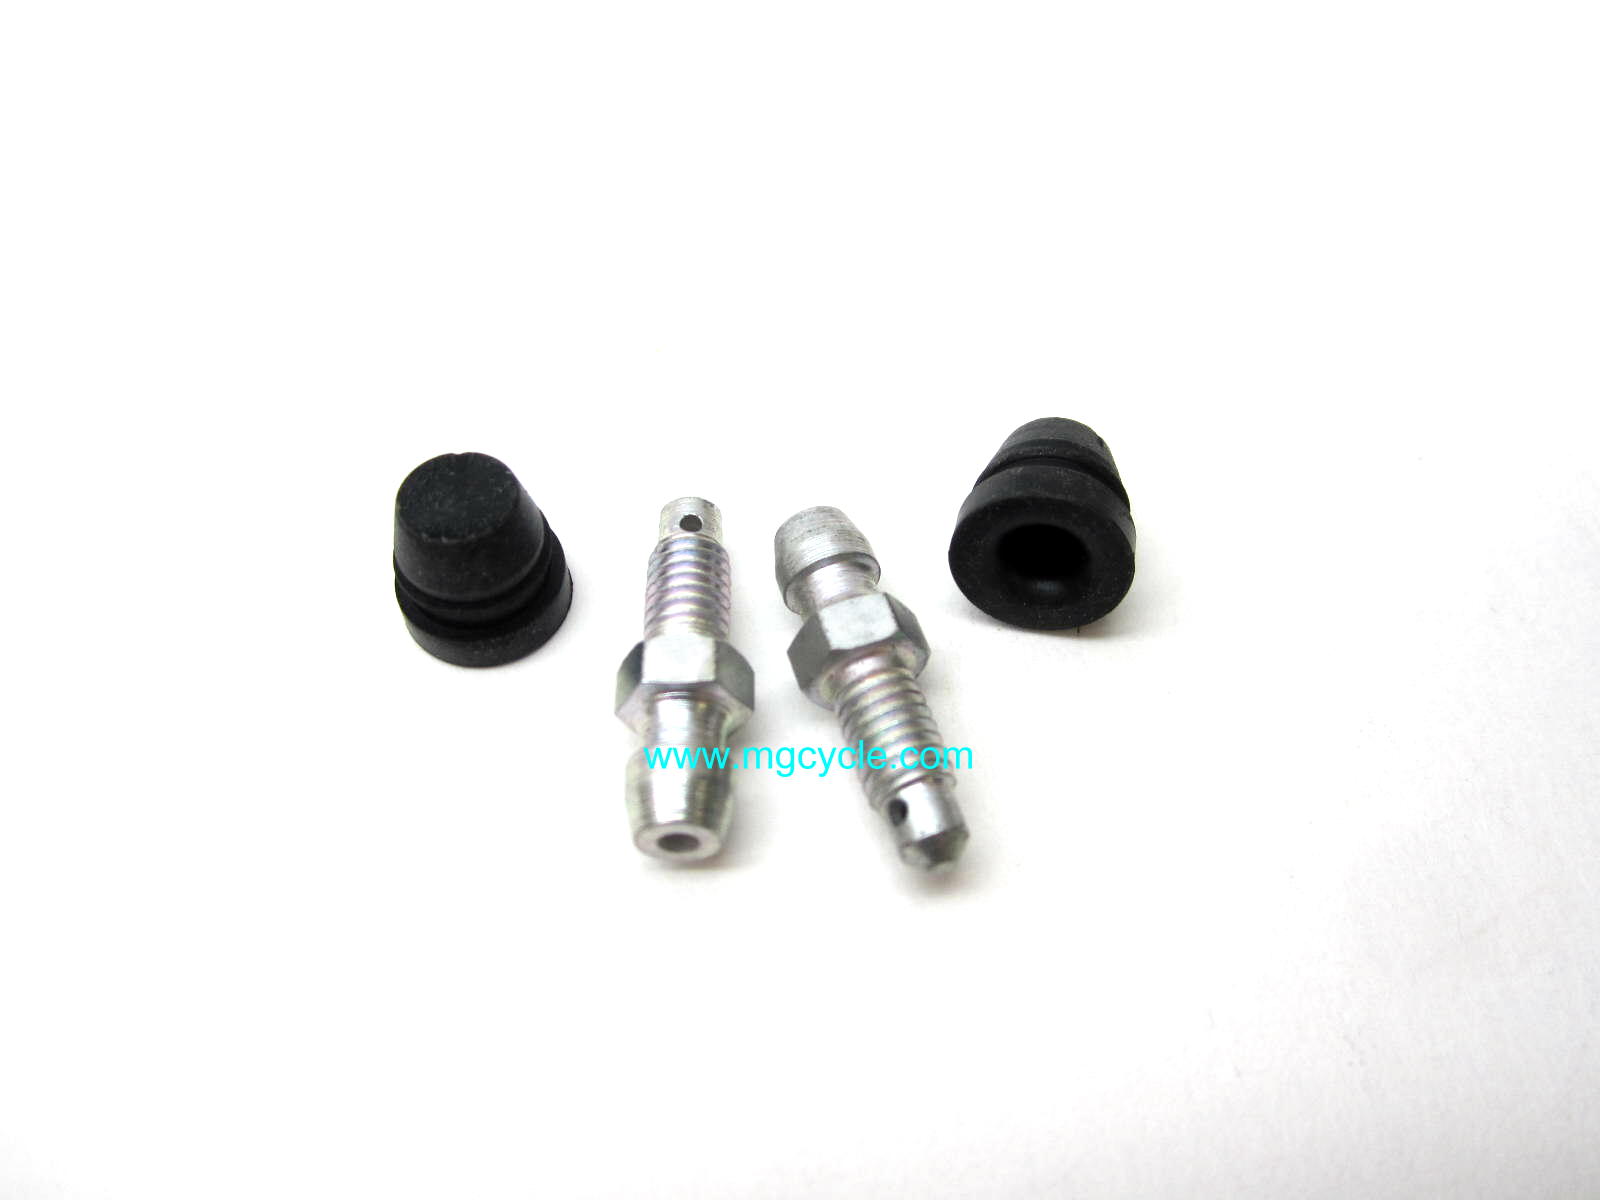 Brembo pack of two 6mm bleeder nipples with caps